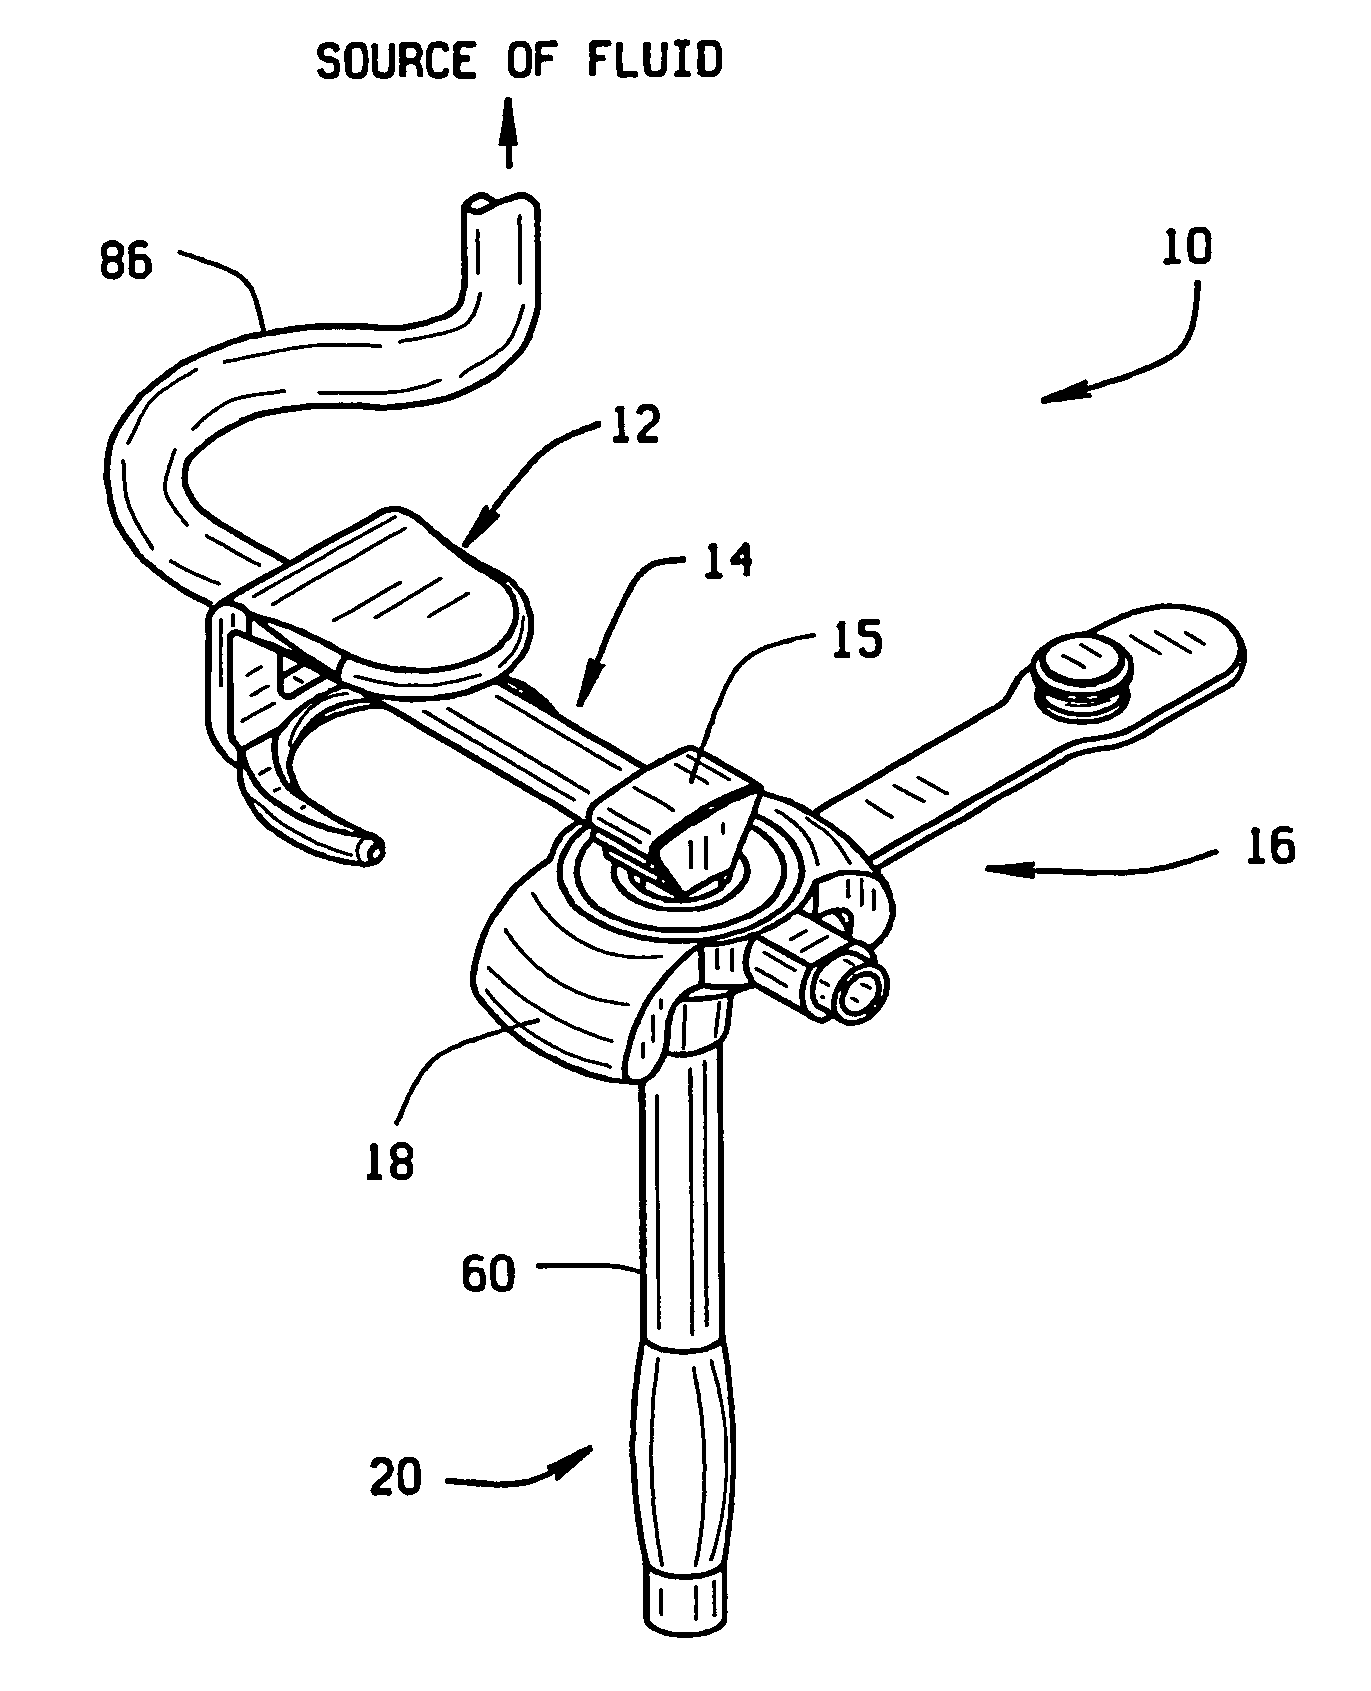 Securing device for a low profile gastrostomy tube having an inflatable balloon